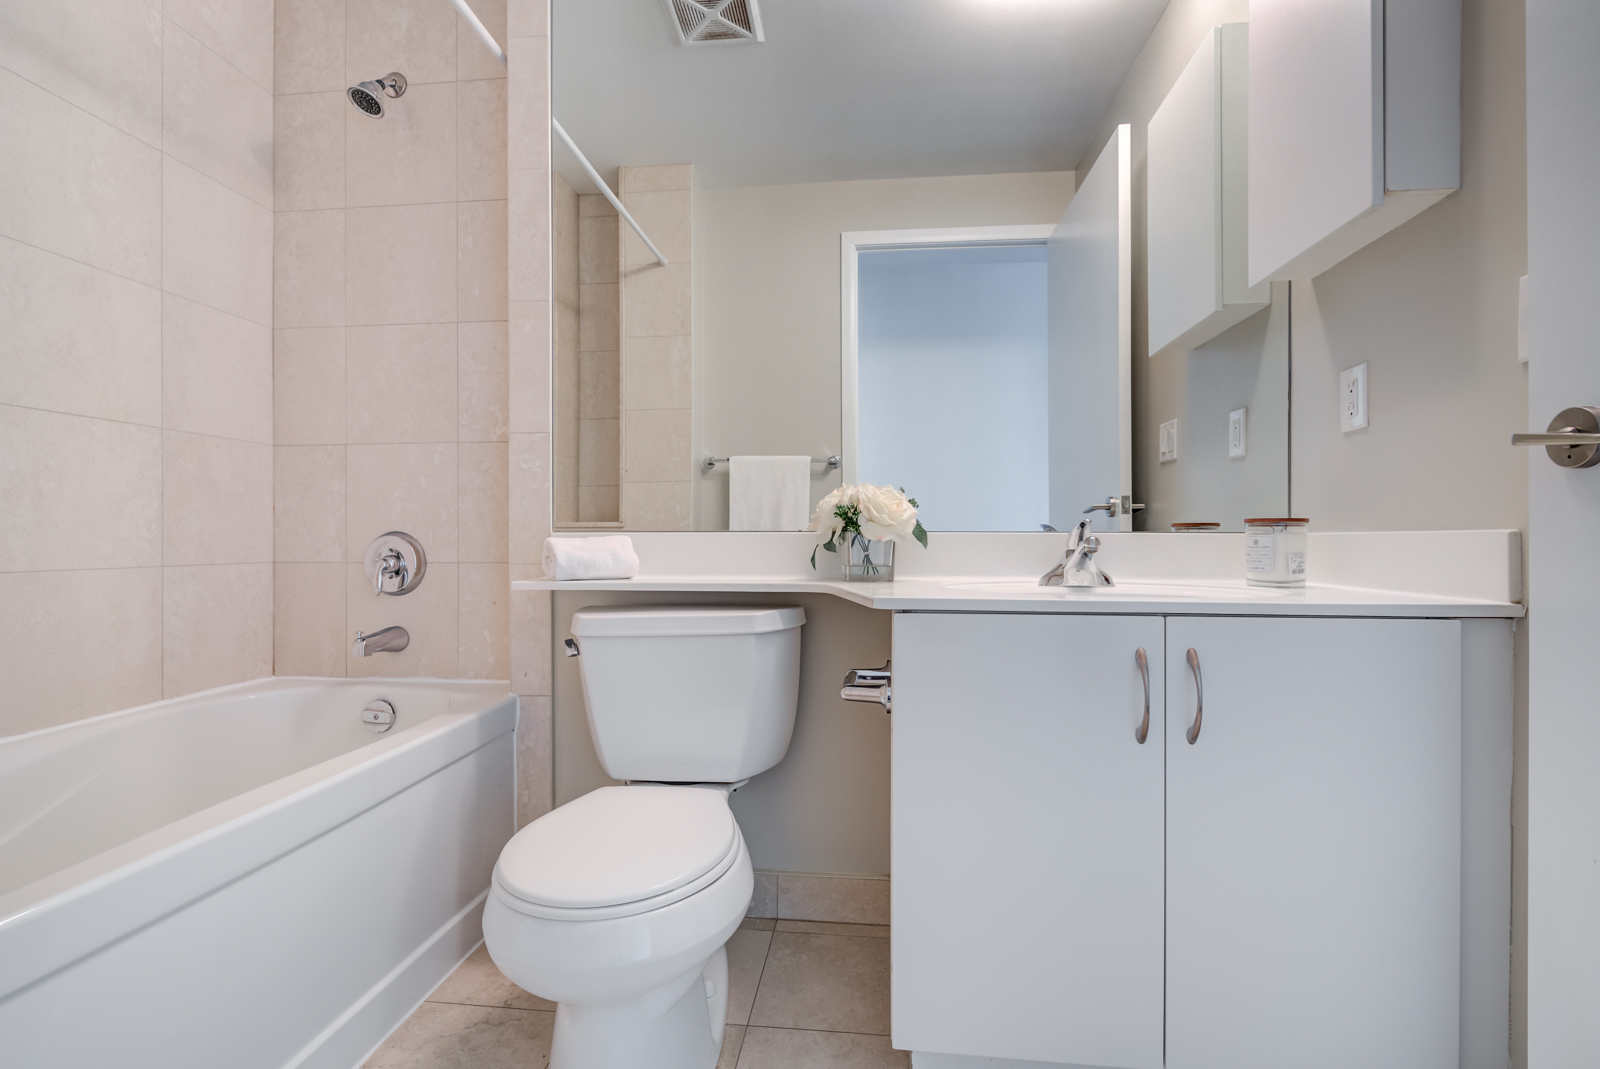 215 Fort York Blvd ensuite bath with white toilet, tub, sink, cabinets and huge mirror.